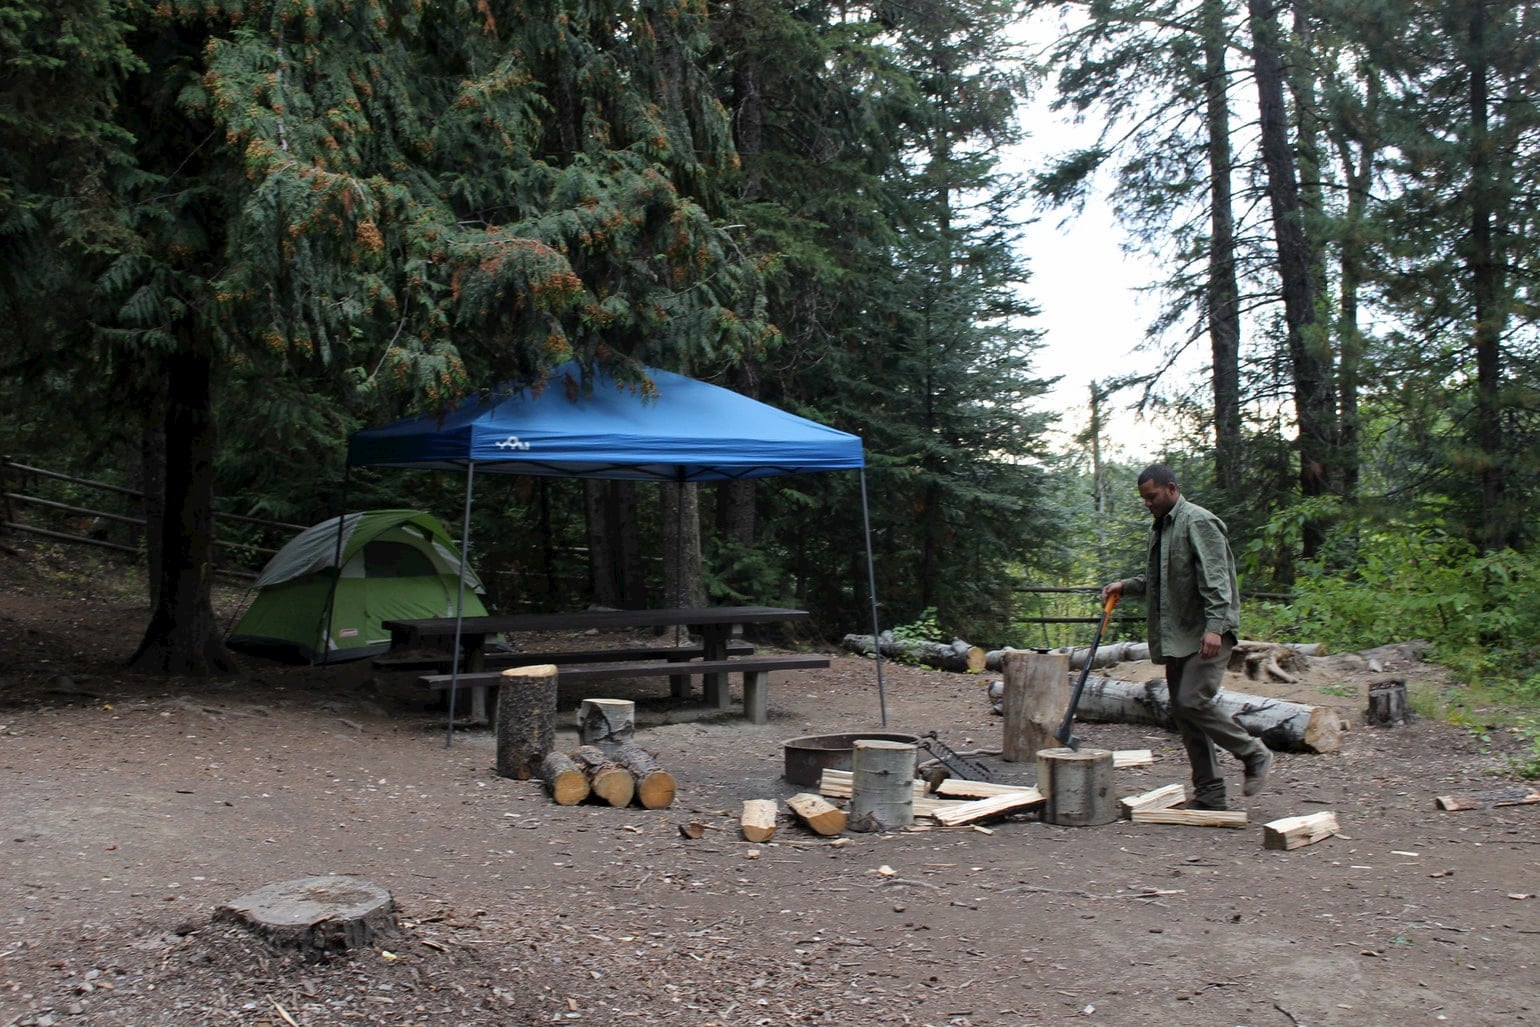 Camper chopping wood beside a fire pit at campsite.